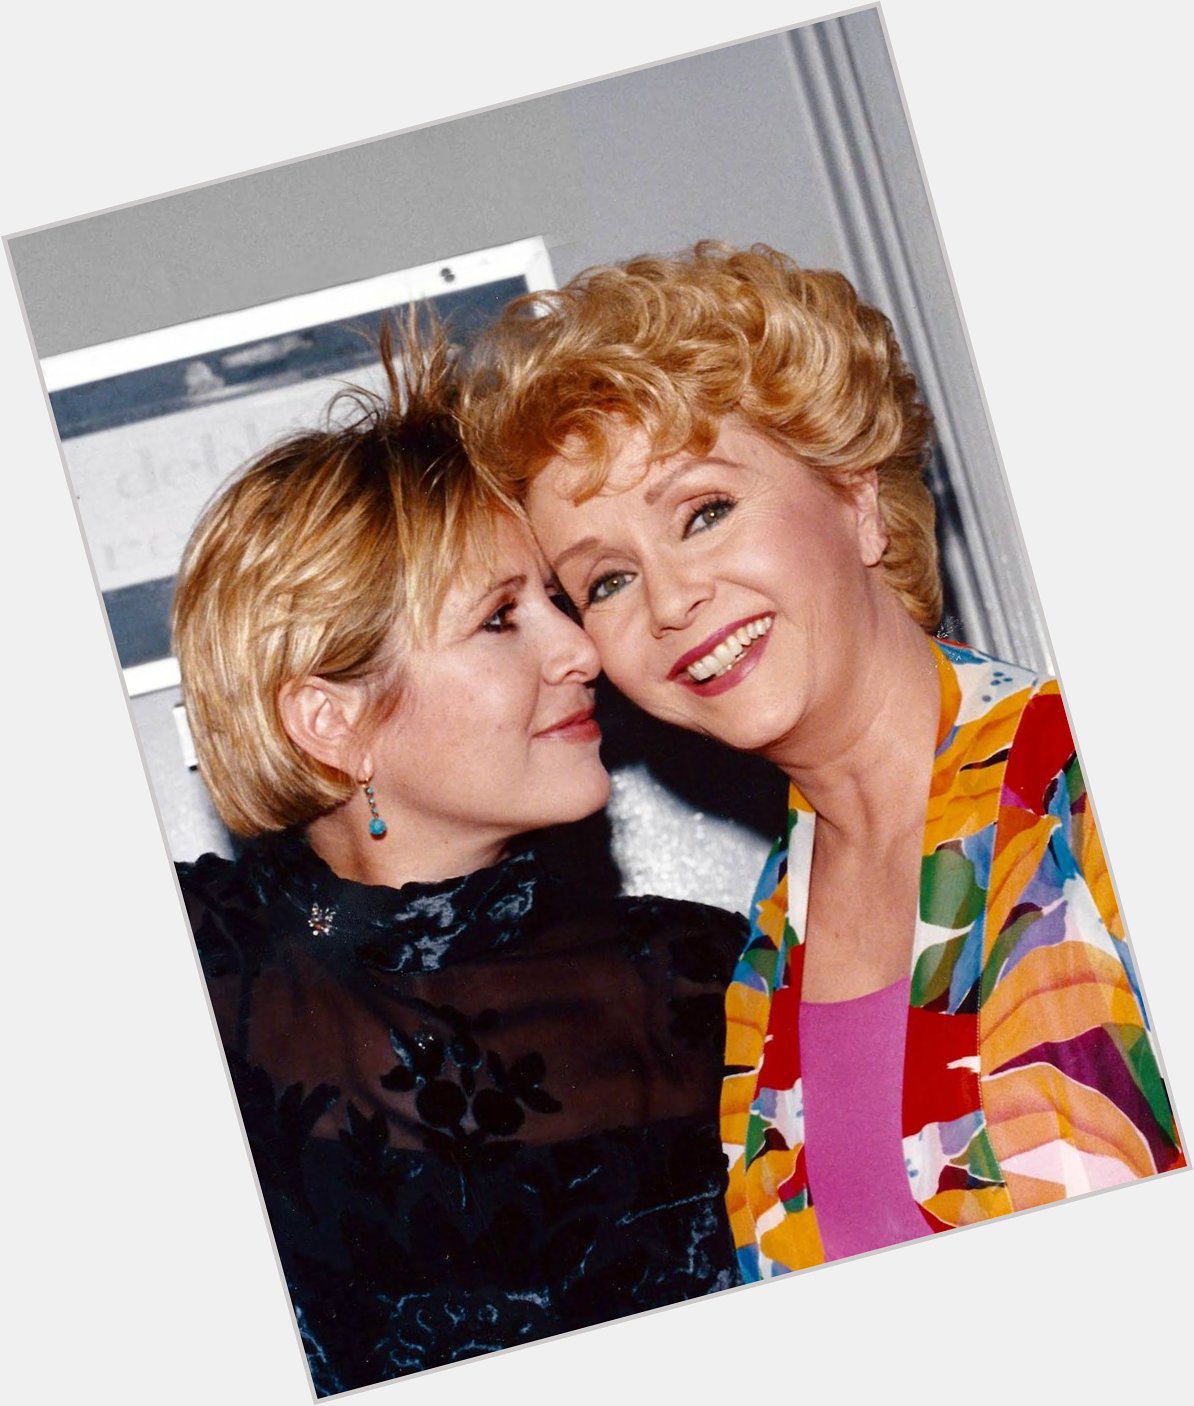 Remembering Debbie Reynolds on what would have been her 85th birthday. Happy Birthday in Heaven! 